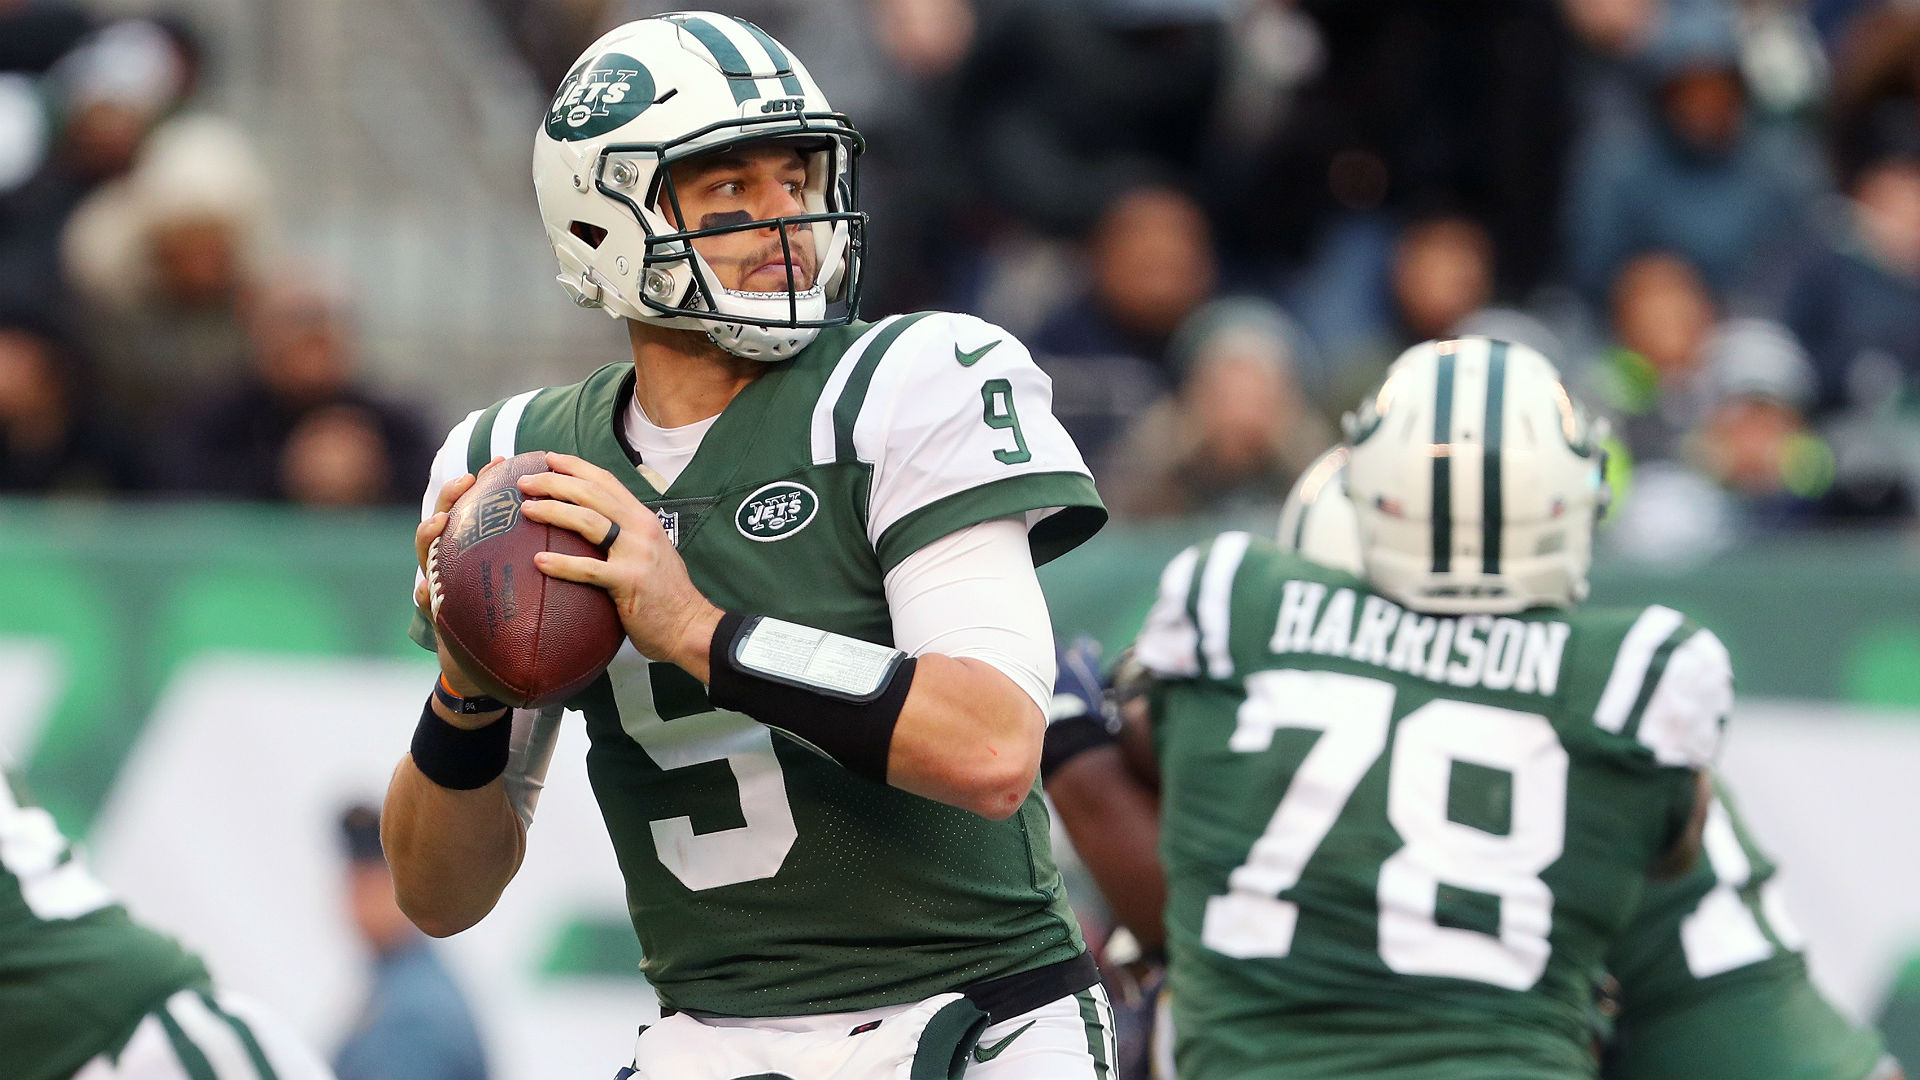 NFL trade rumors: Jets getting calls about QB Bryce Petty